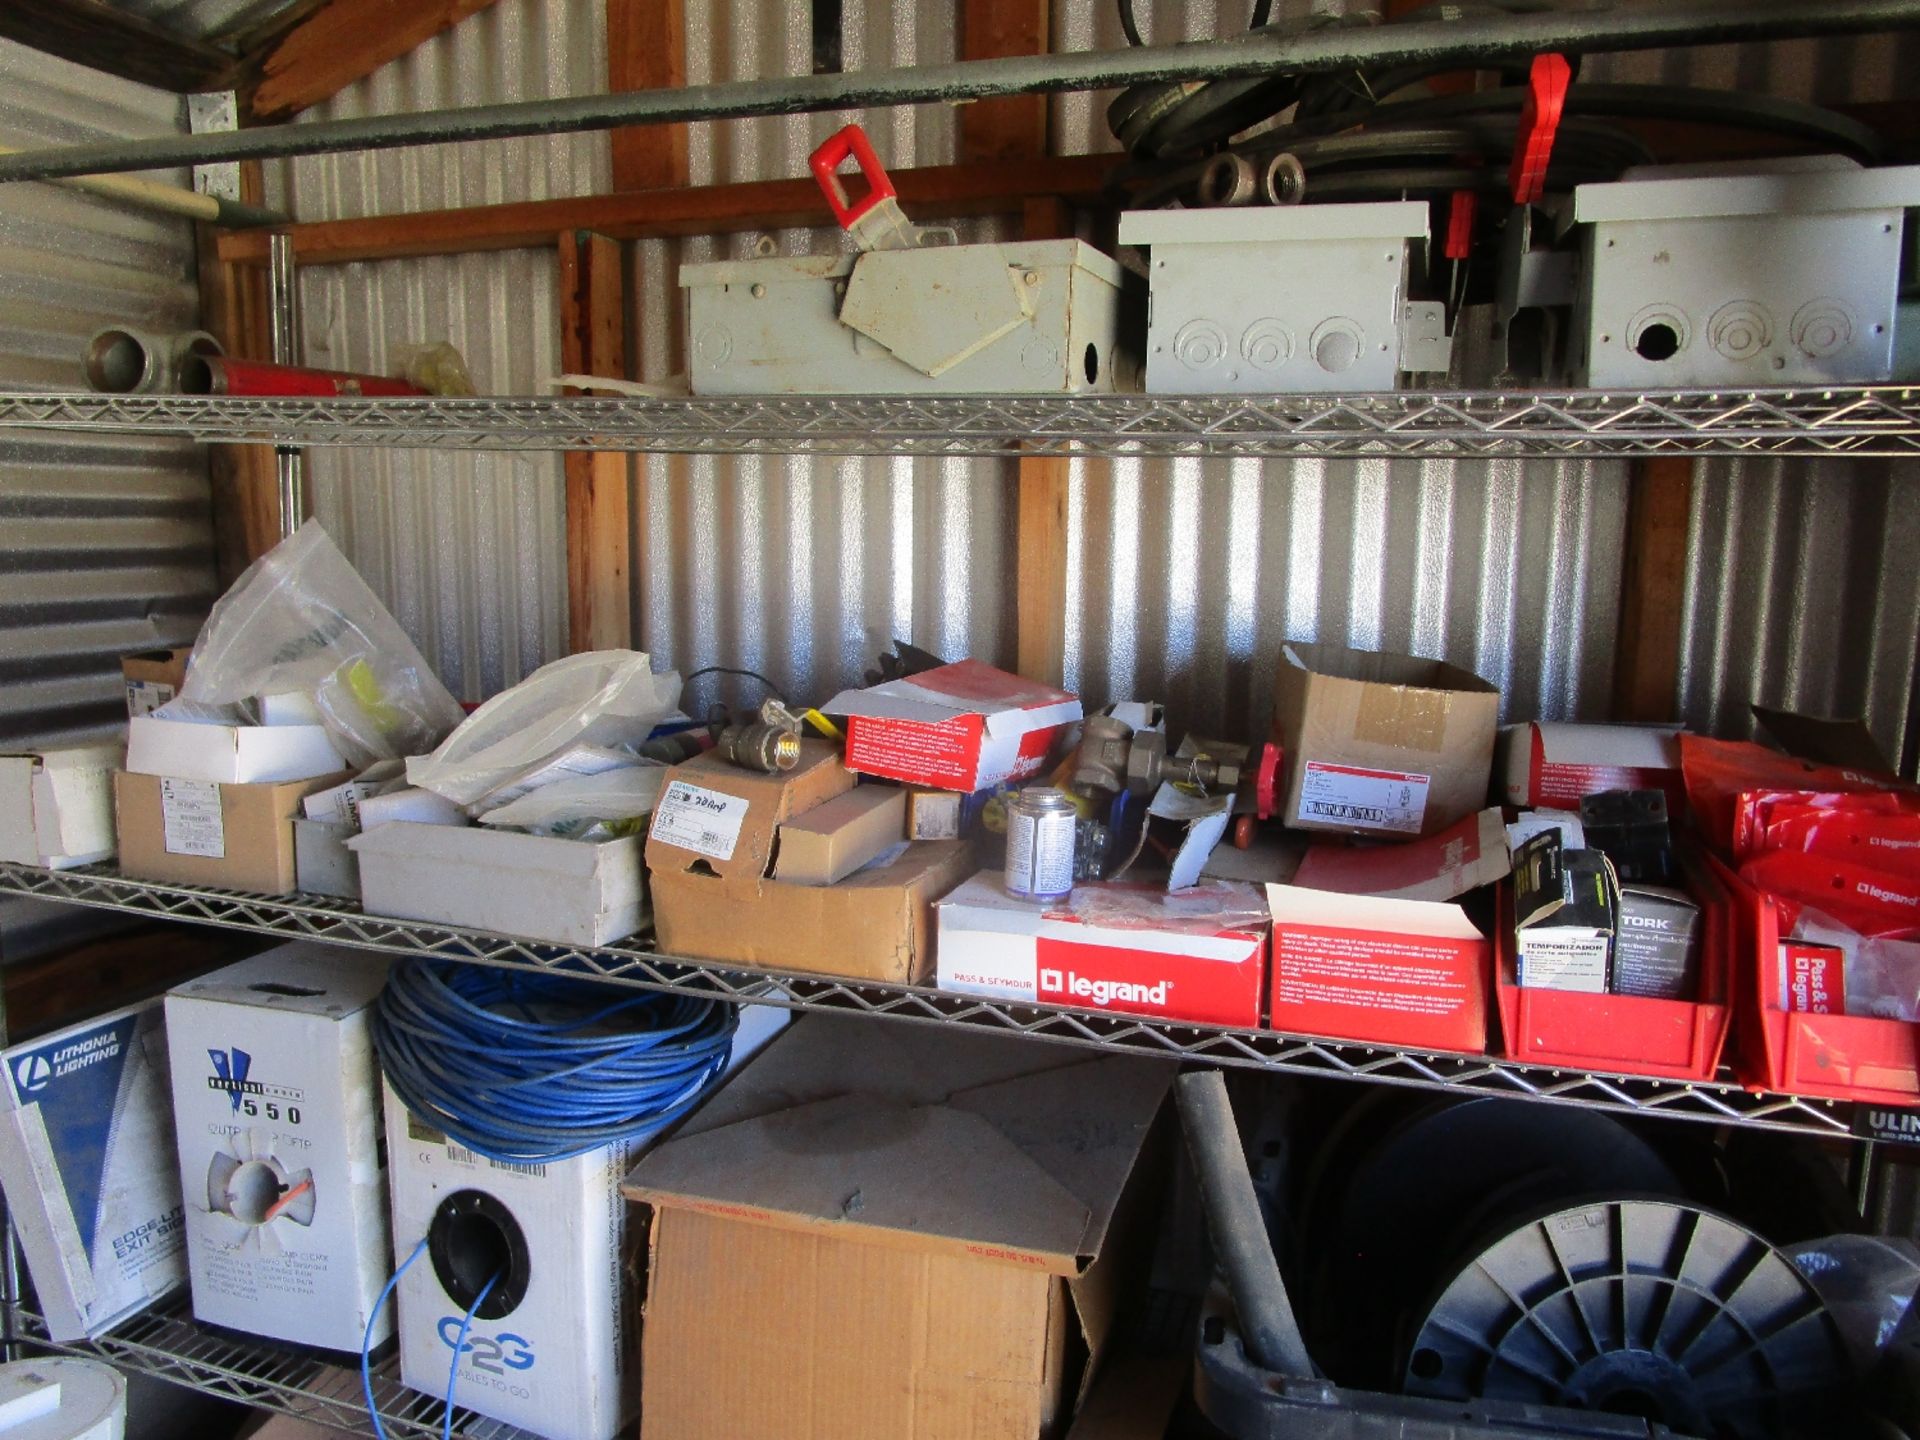 10' x 10' Corrugated Metal Storage Shed with Contents - Image 5 of 5